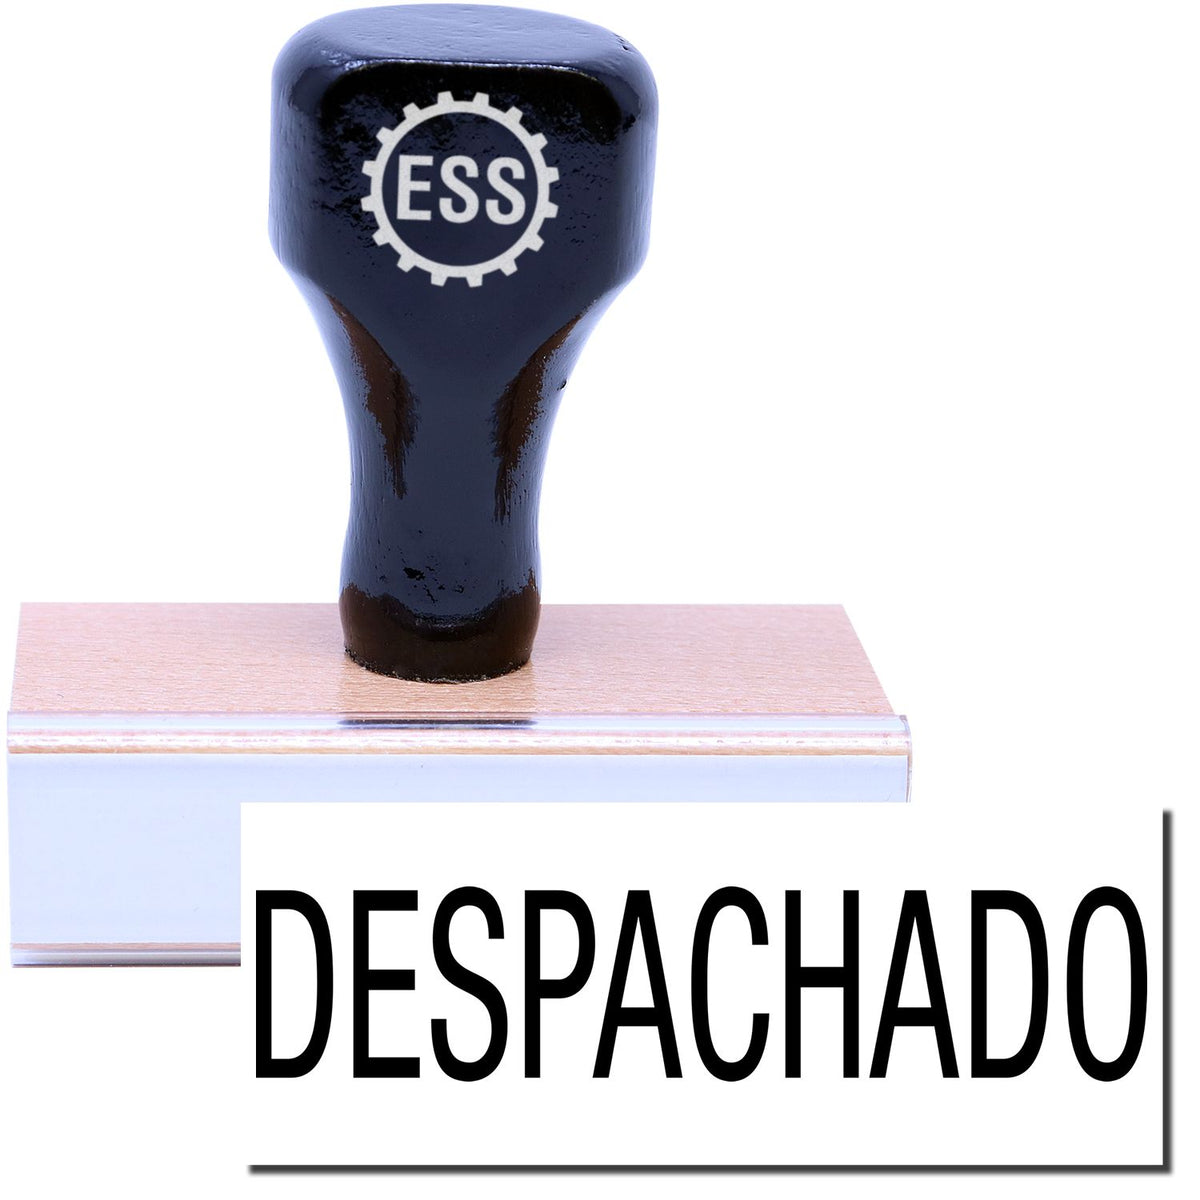 A stock office rubber stamp with a stamped image showing how the text &quot;DESPACHADO&quot; is displayed after stamping.